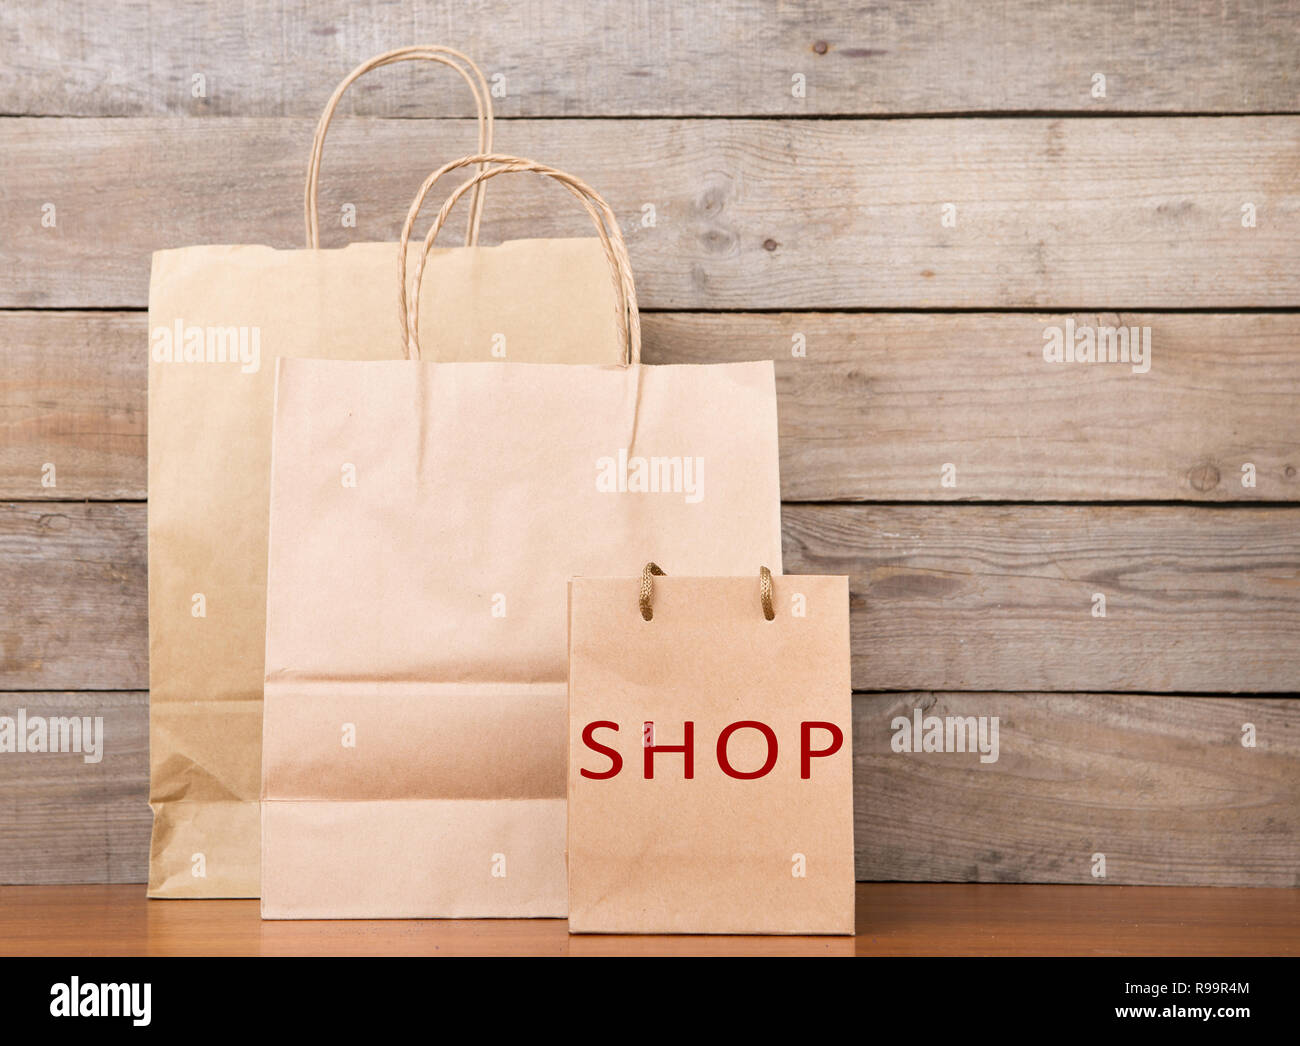 Shopping bags with inscription 'SHOP' on wooden background Stock Photo